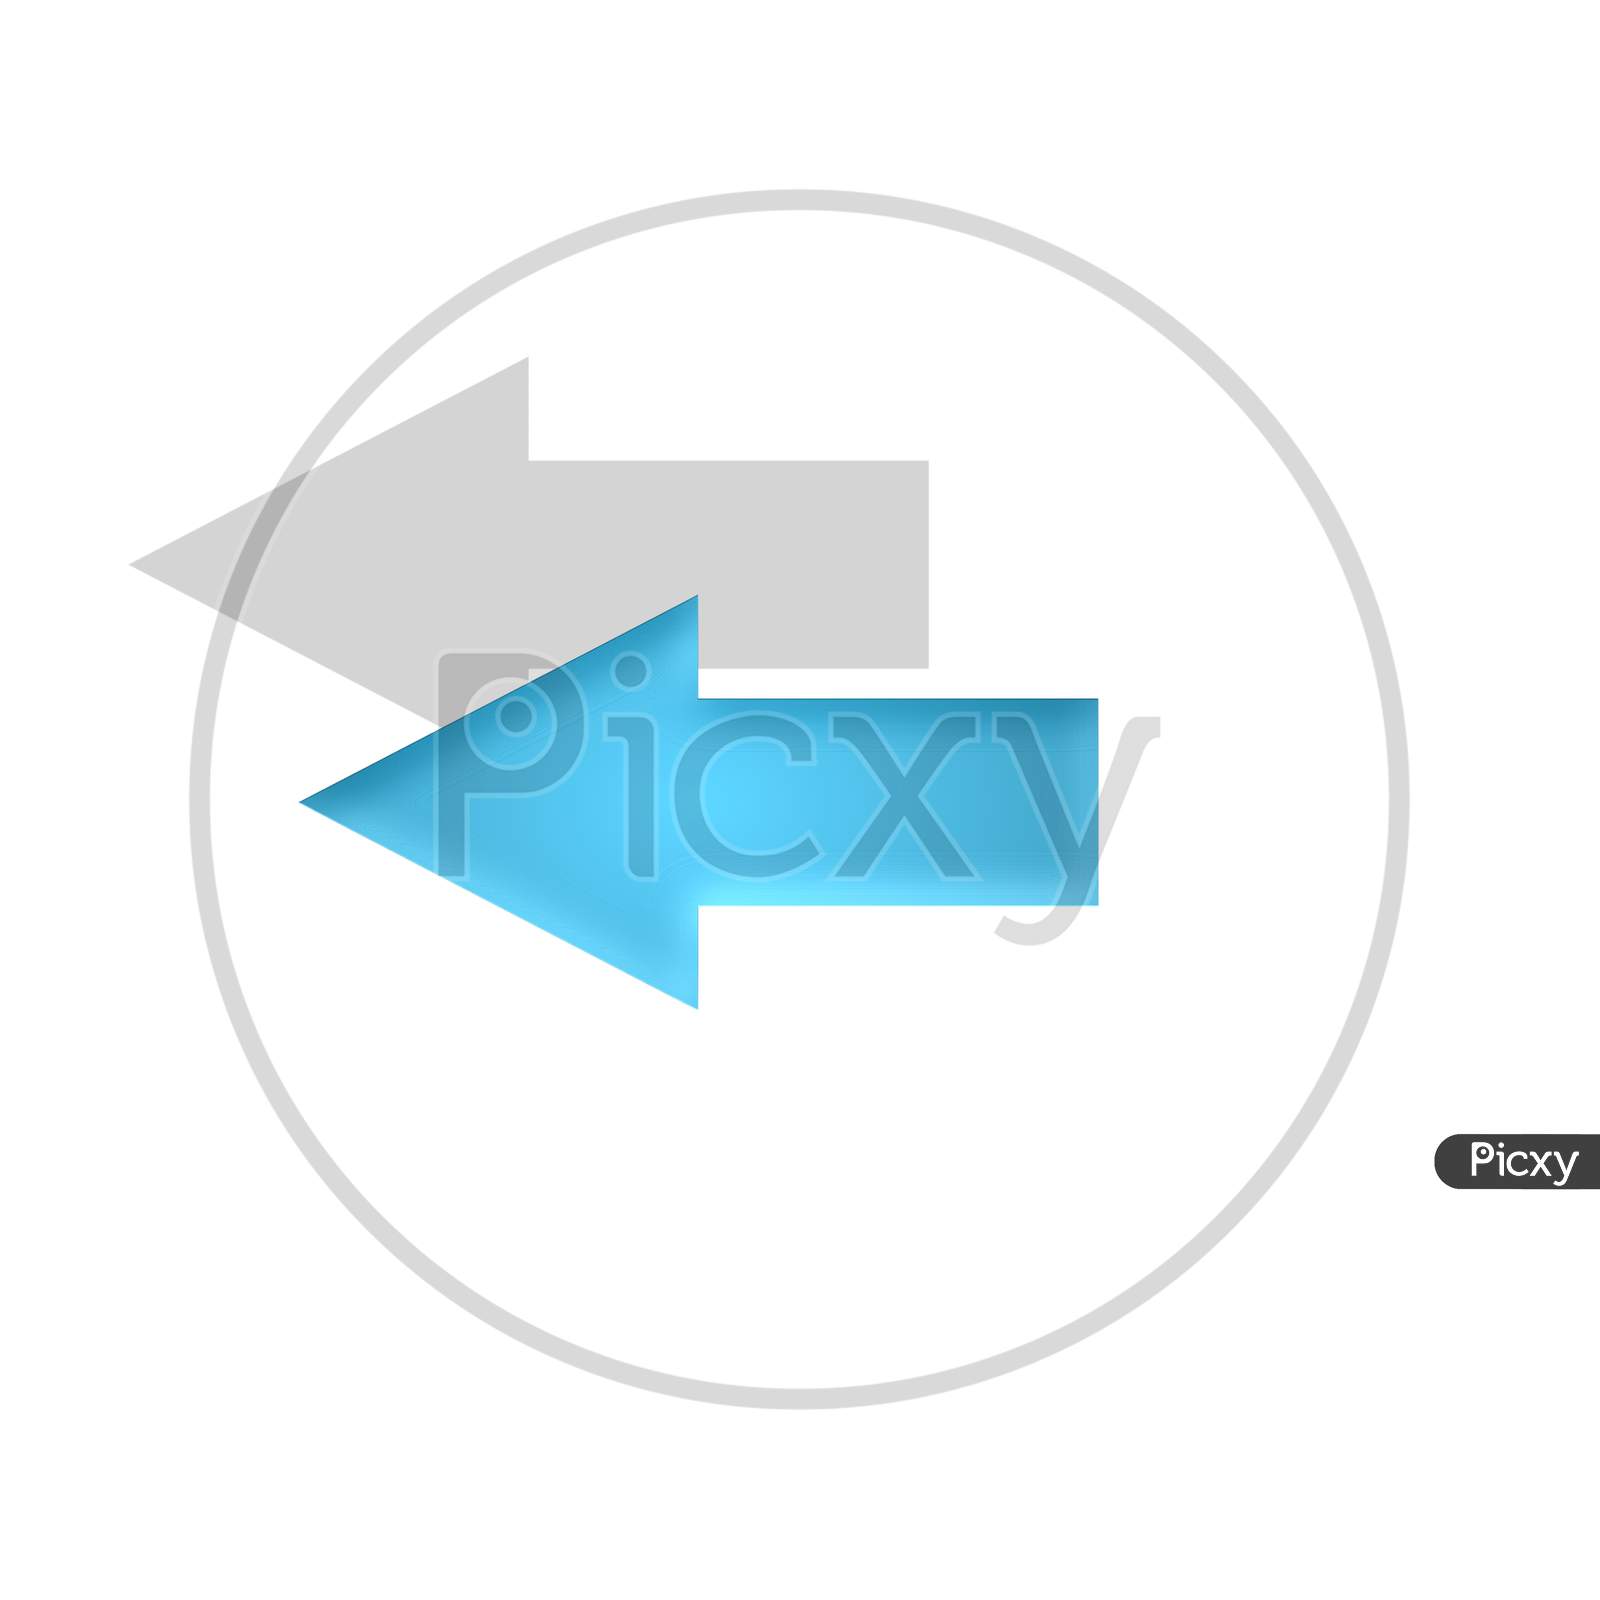 Digital art of a left arrow icon in white background